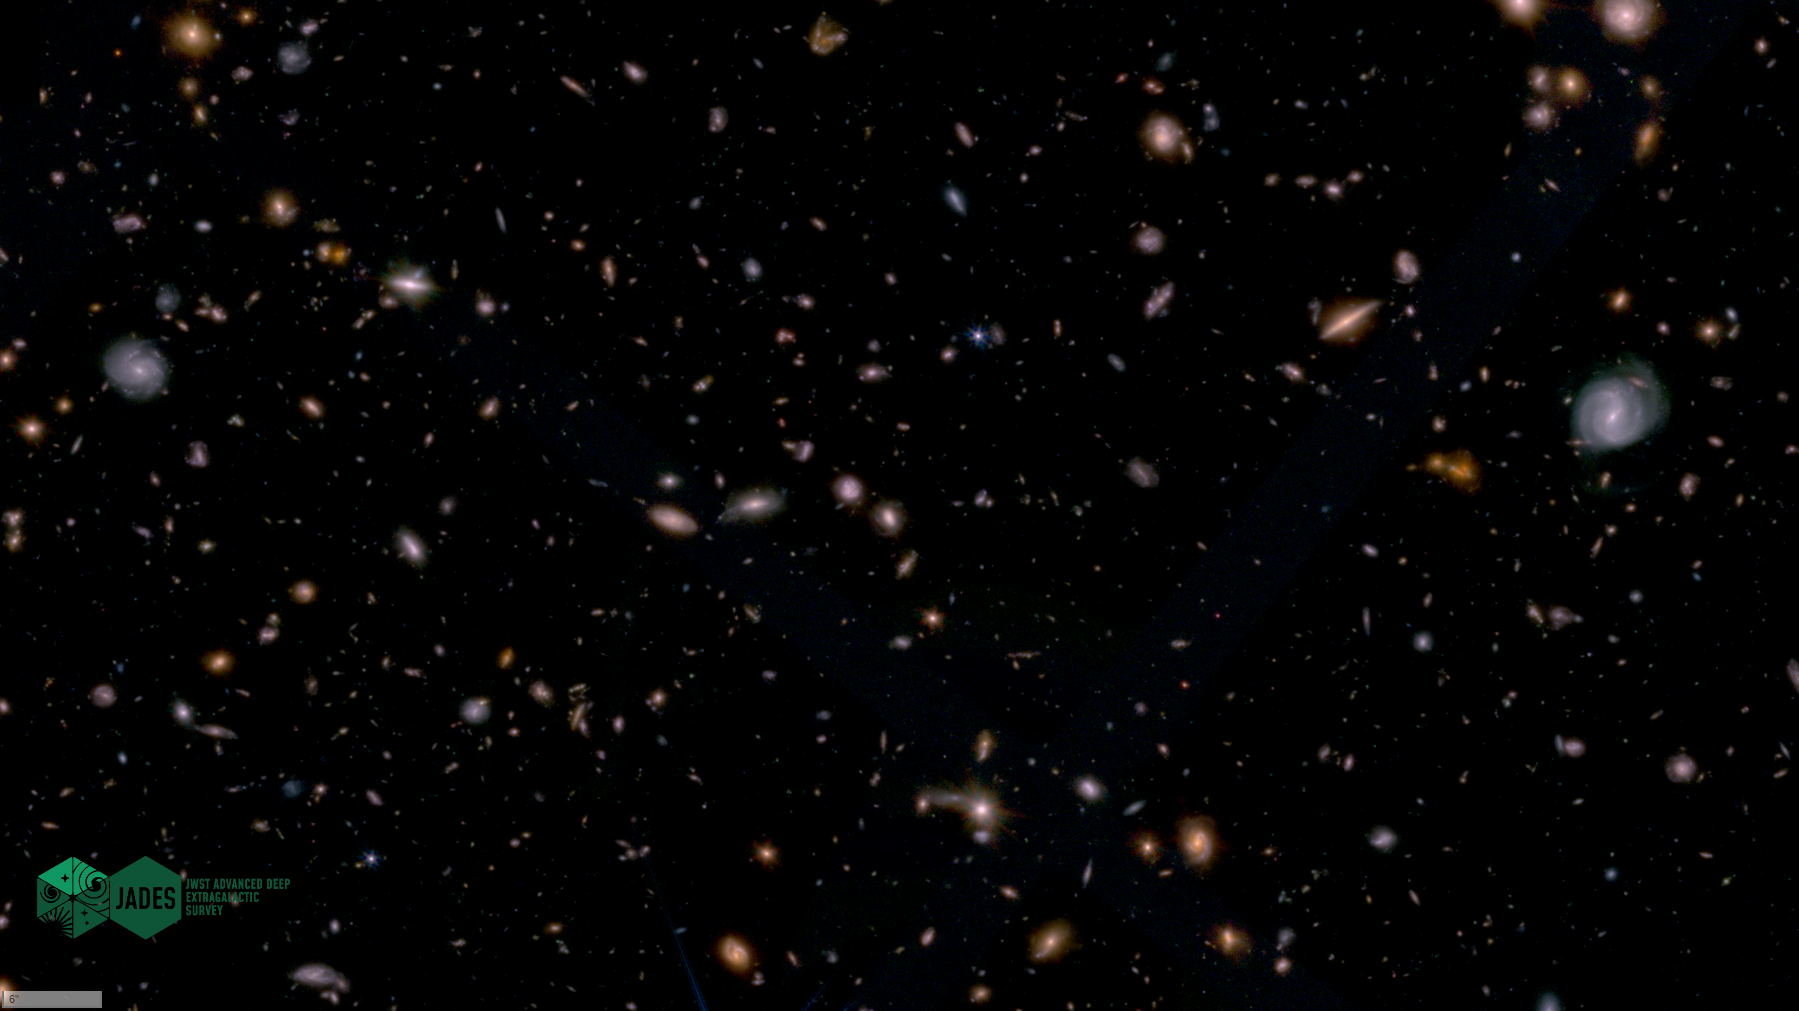 NASA's JWST captures the deepest view of galaxies in the night sky.